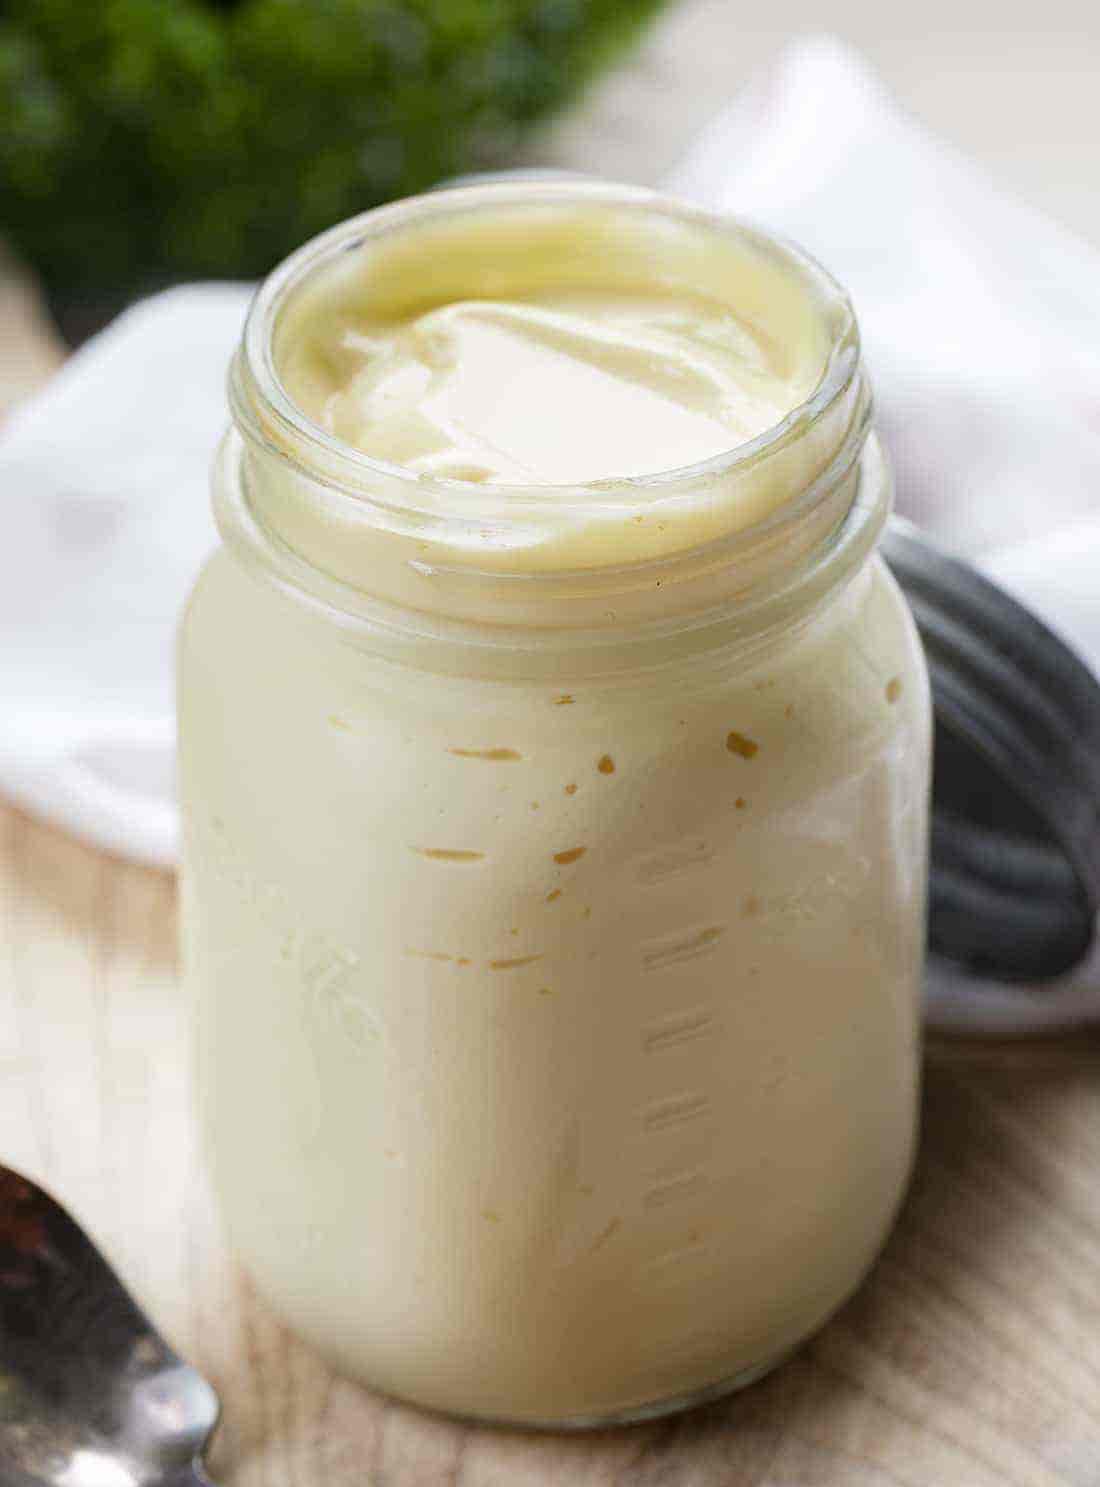 Elevate Your Meals with Fresh Homemade Mayonnaise